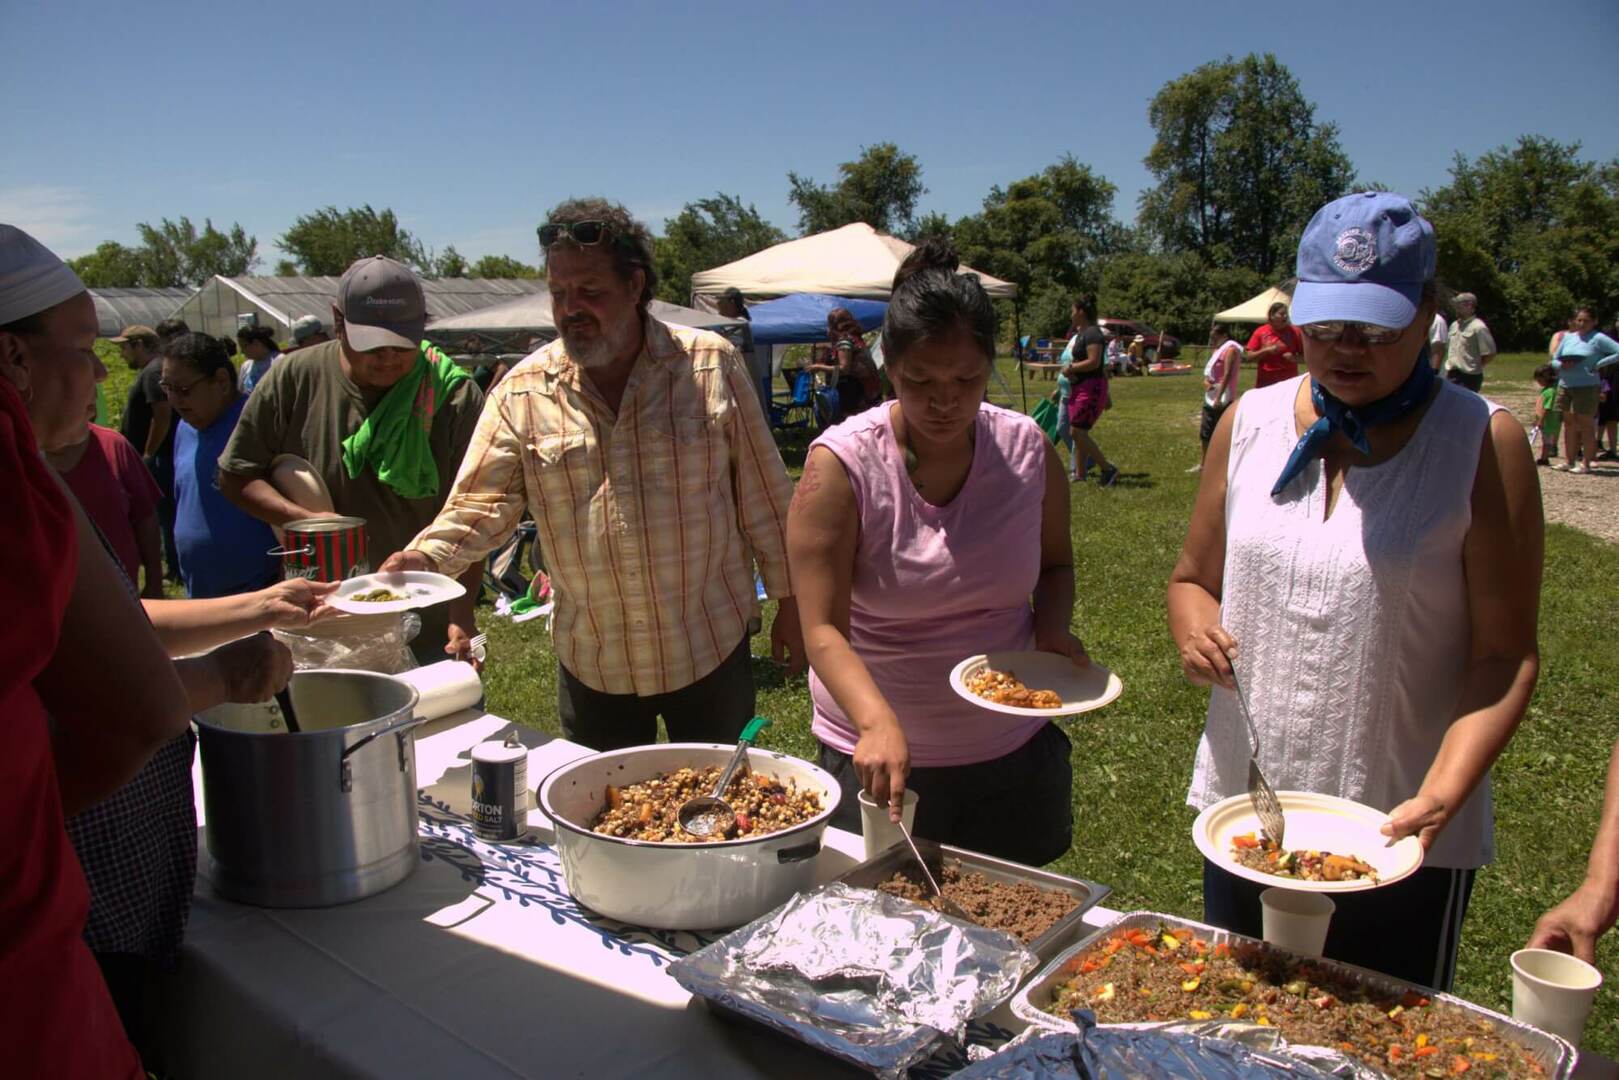 People receiving a meal as part of the Meskwaki Food Sovereignty initiative